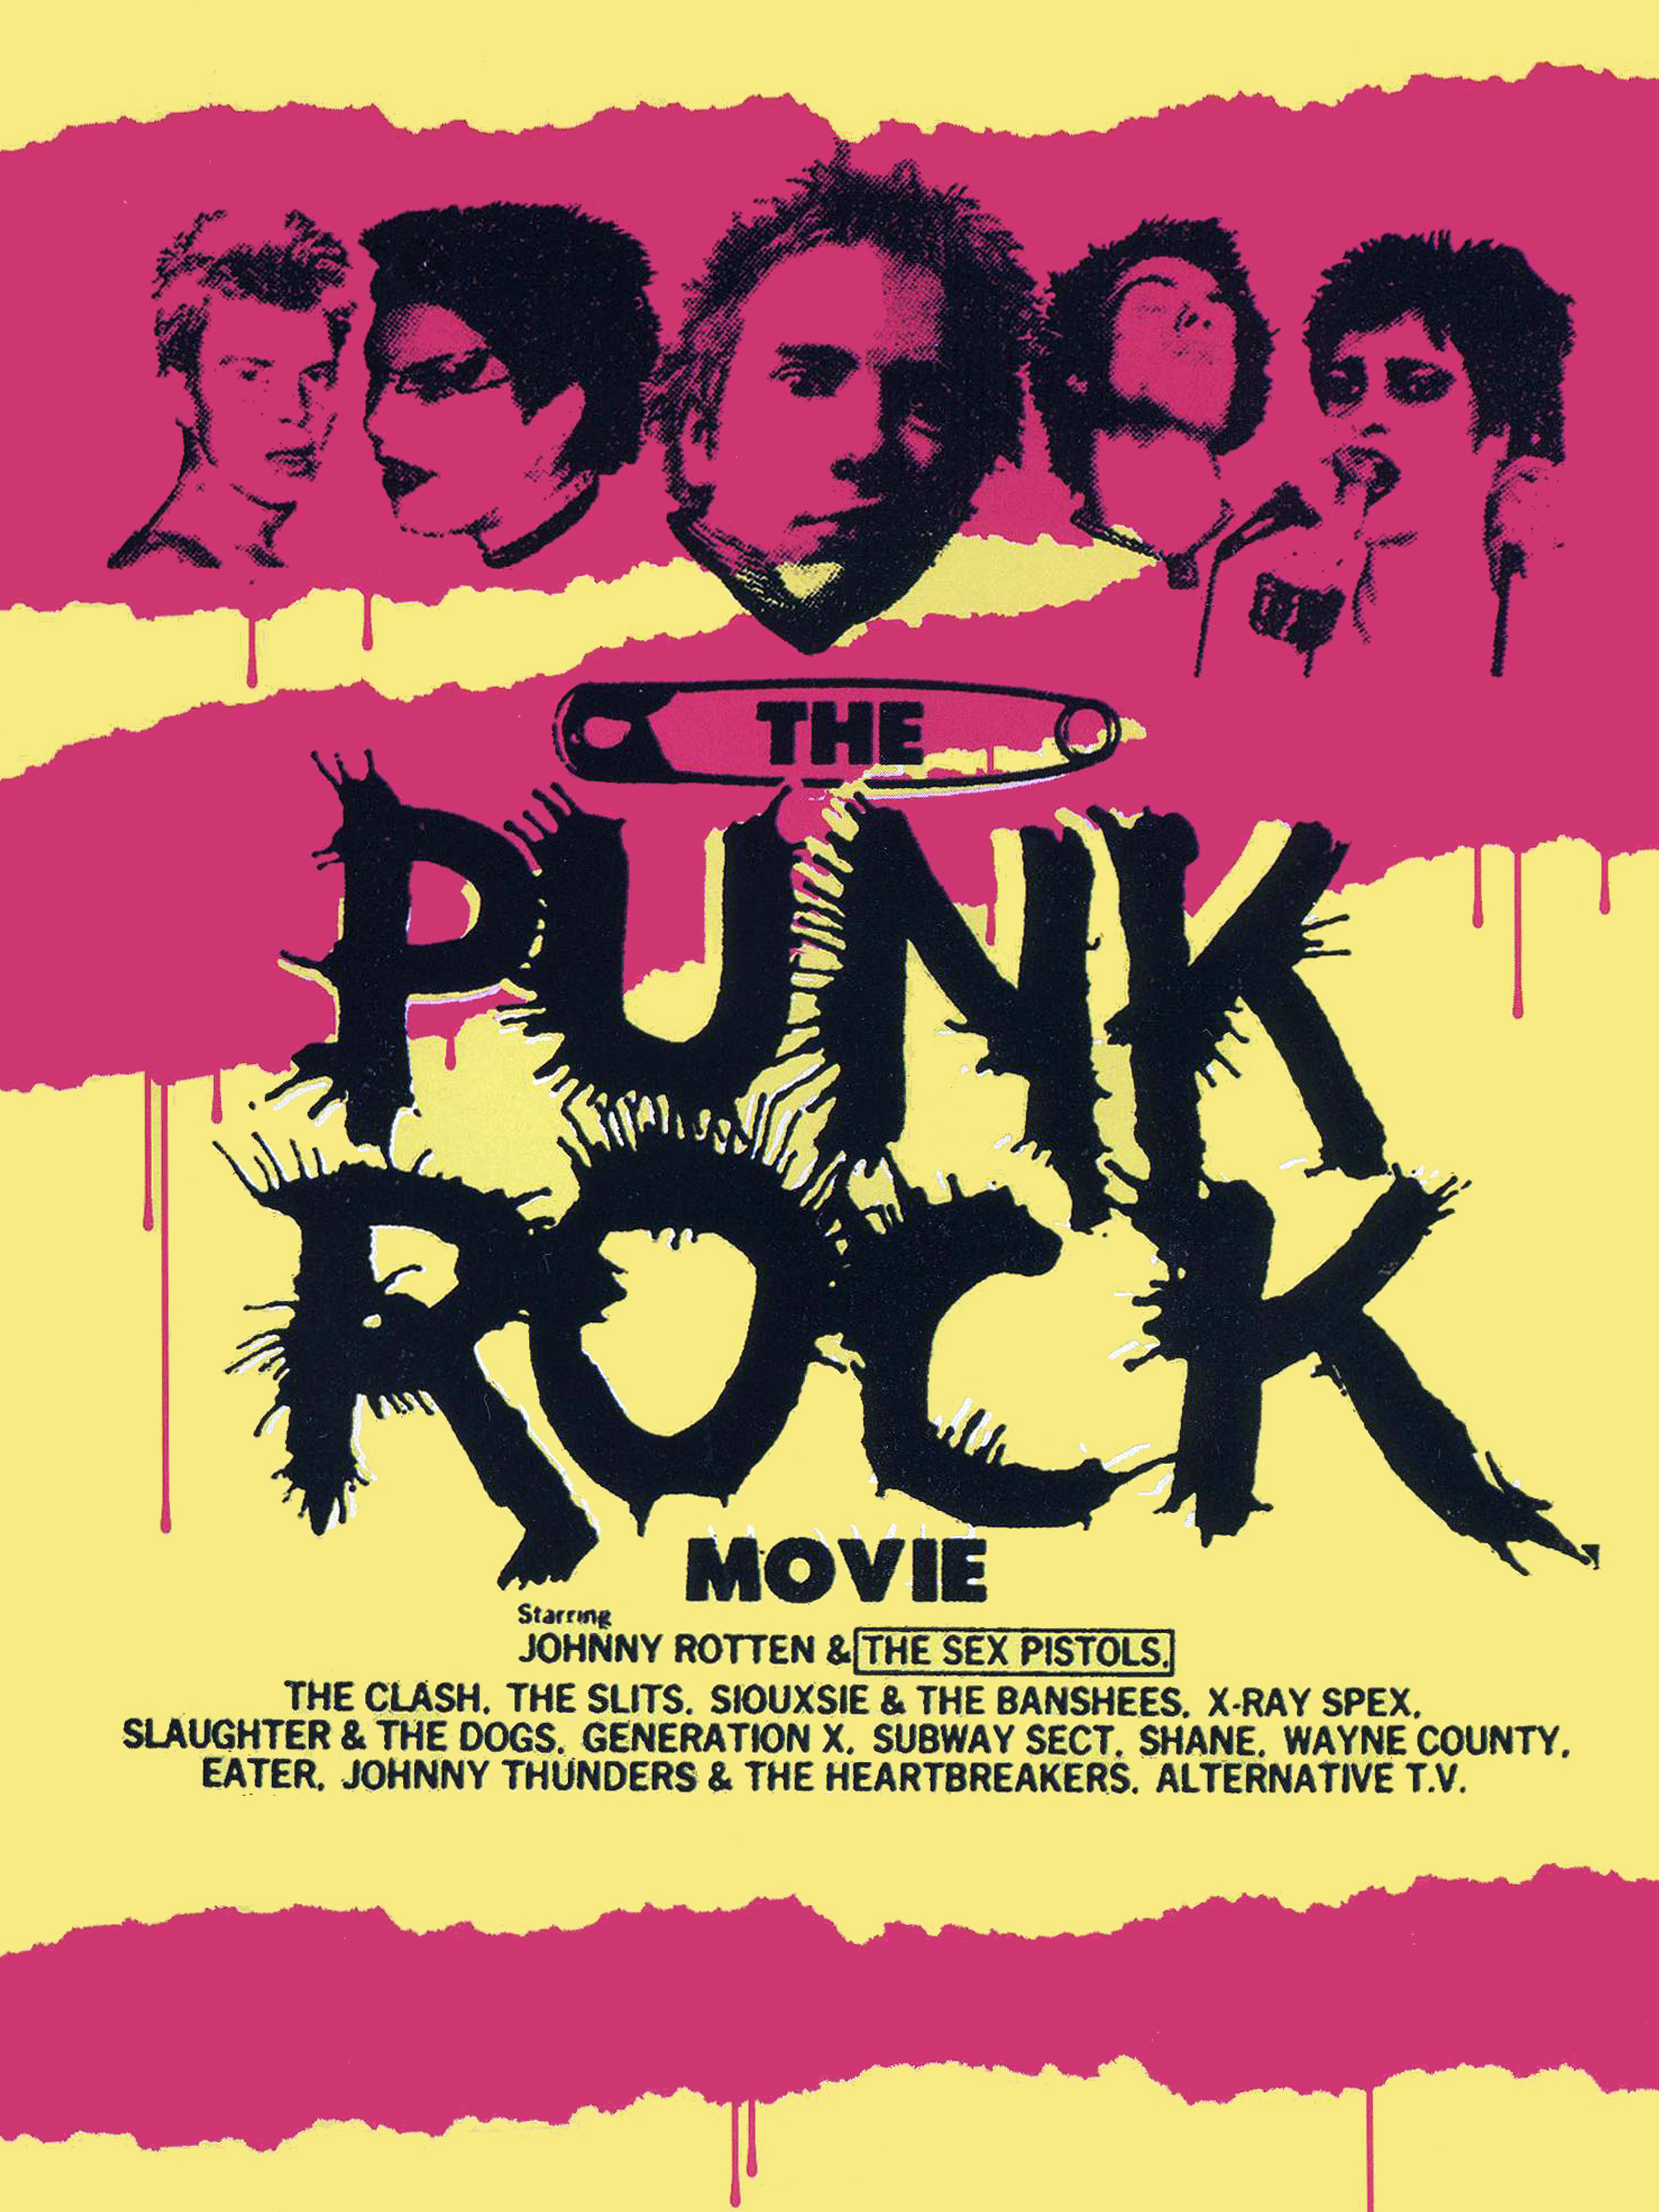 The Punk Rock Movie Aka The Punk Rock Movie from England